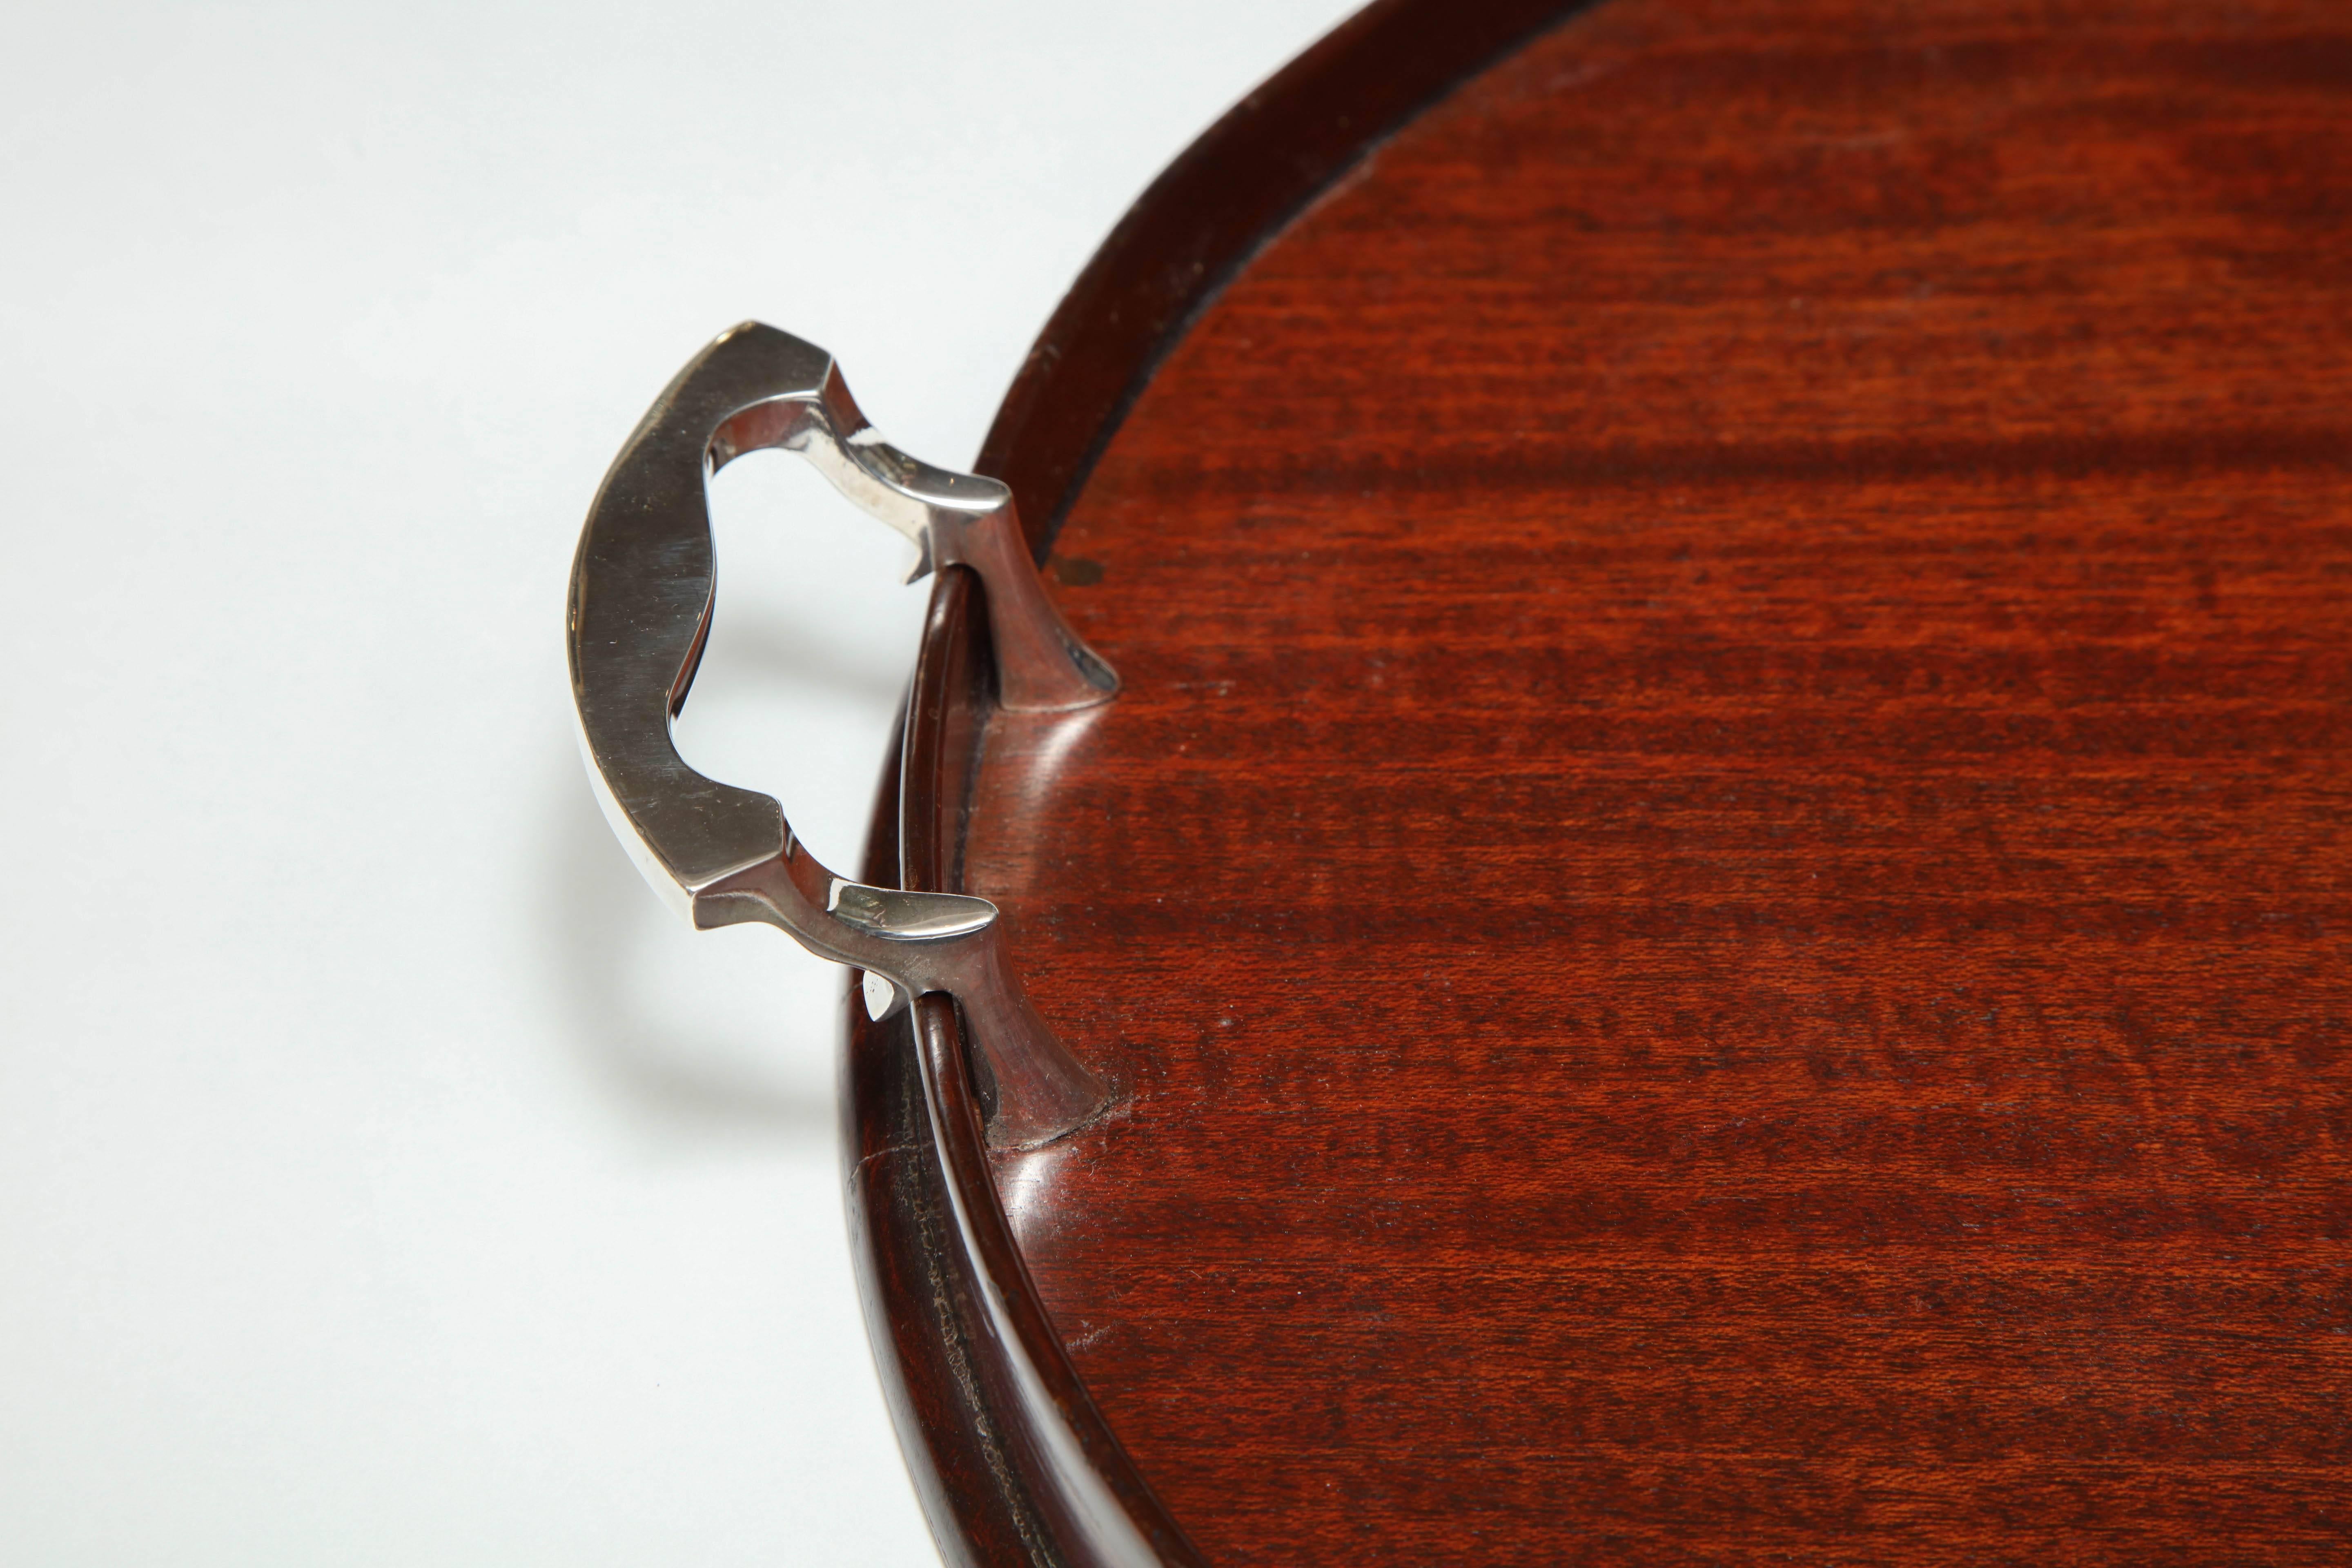 round serving tray with handles